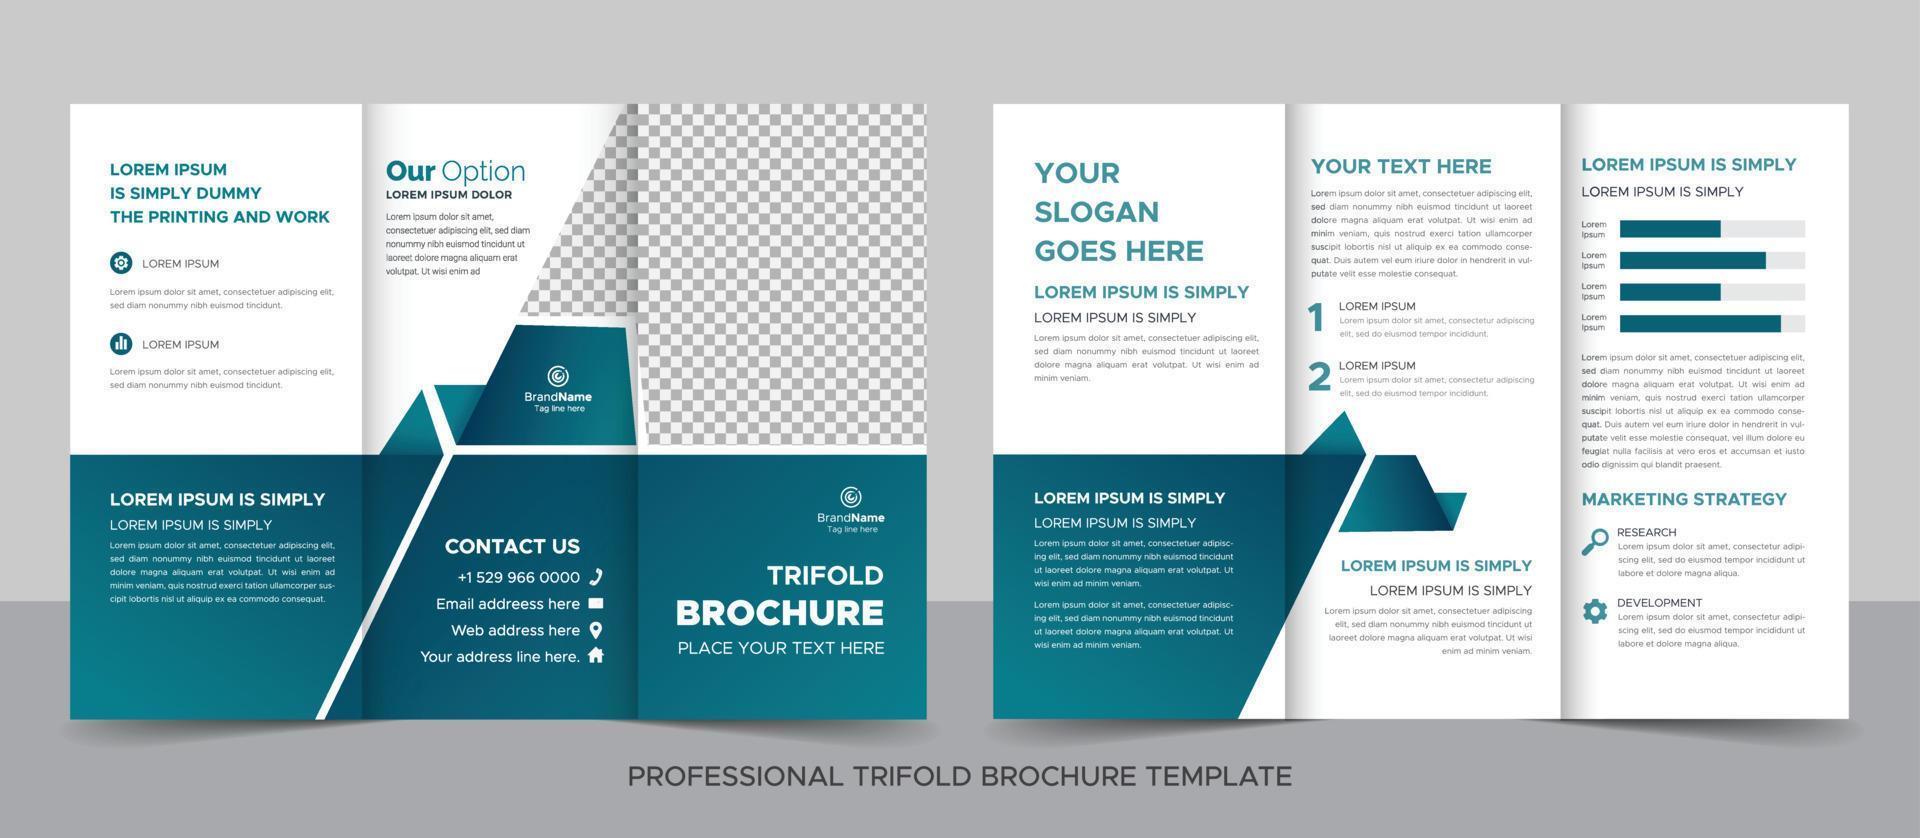 Trifold Brochure Design Template for Your Company, Corporate, Business, Advertising, Marketing, Agency, And Internet Business. vector